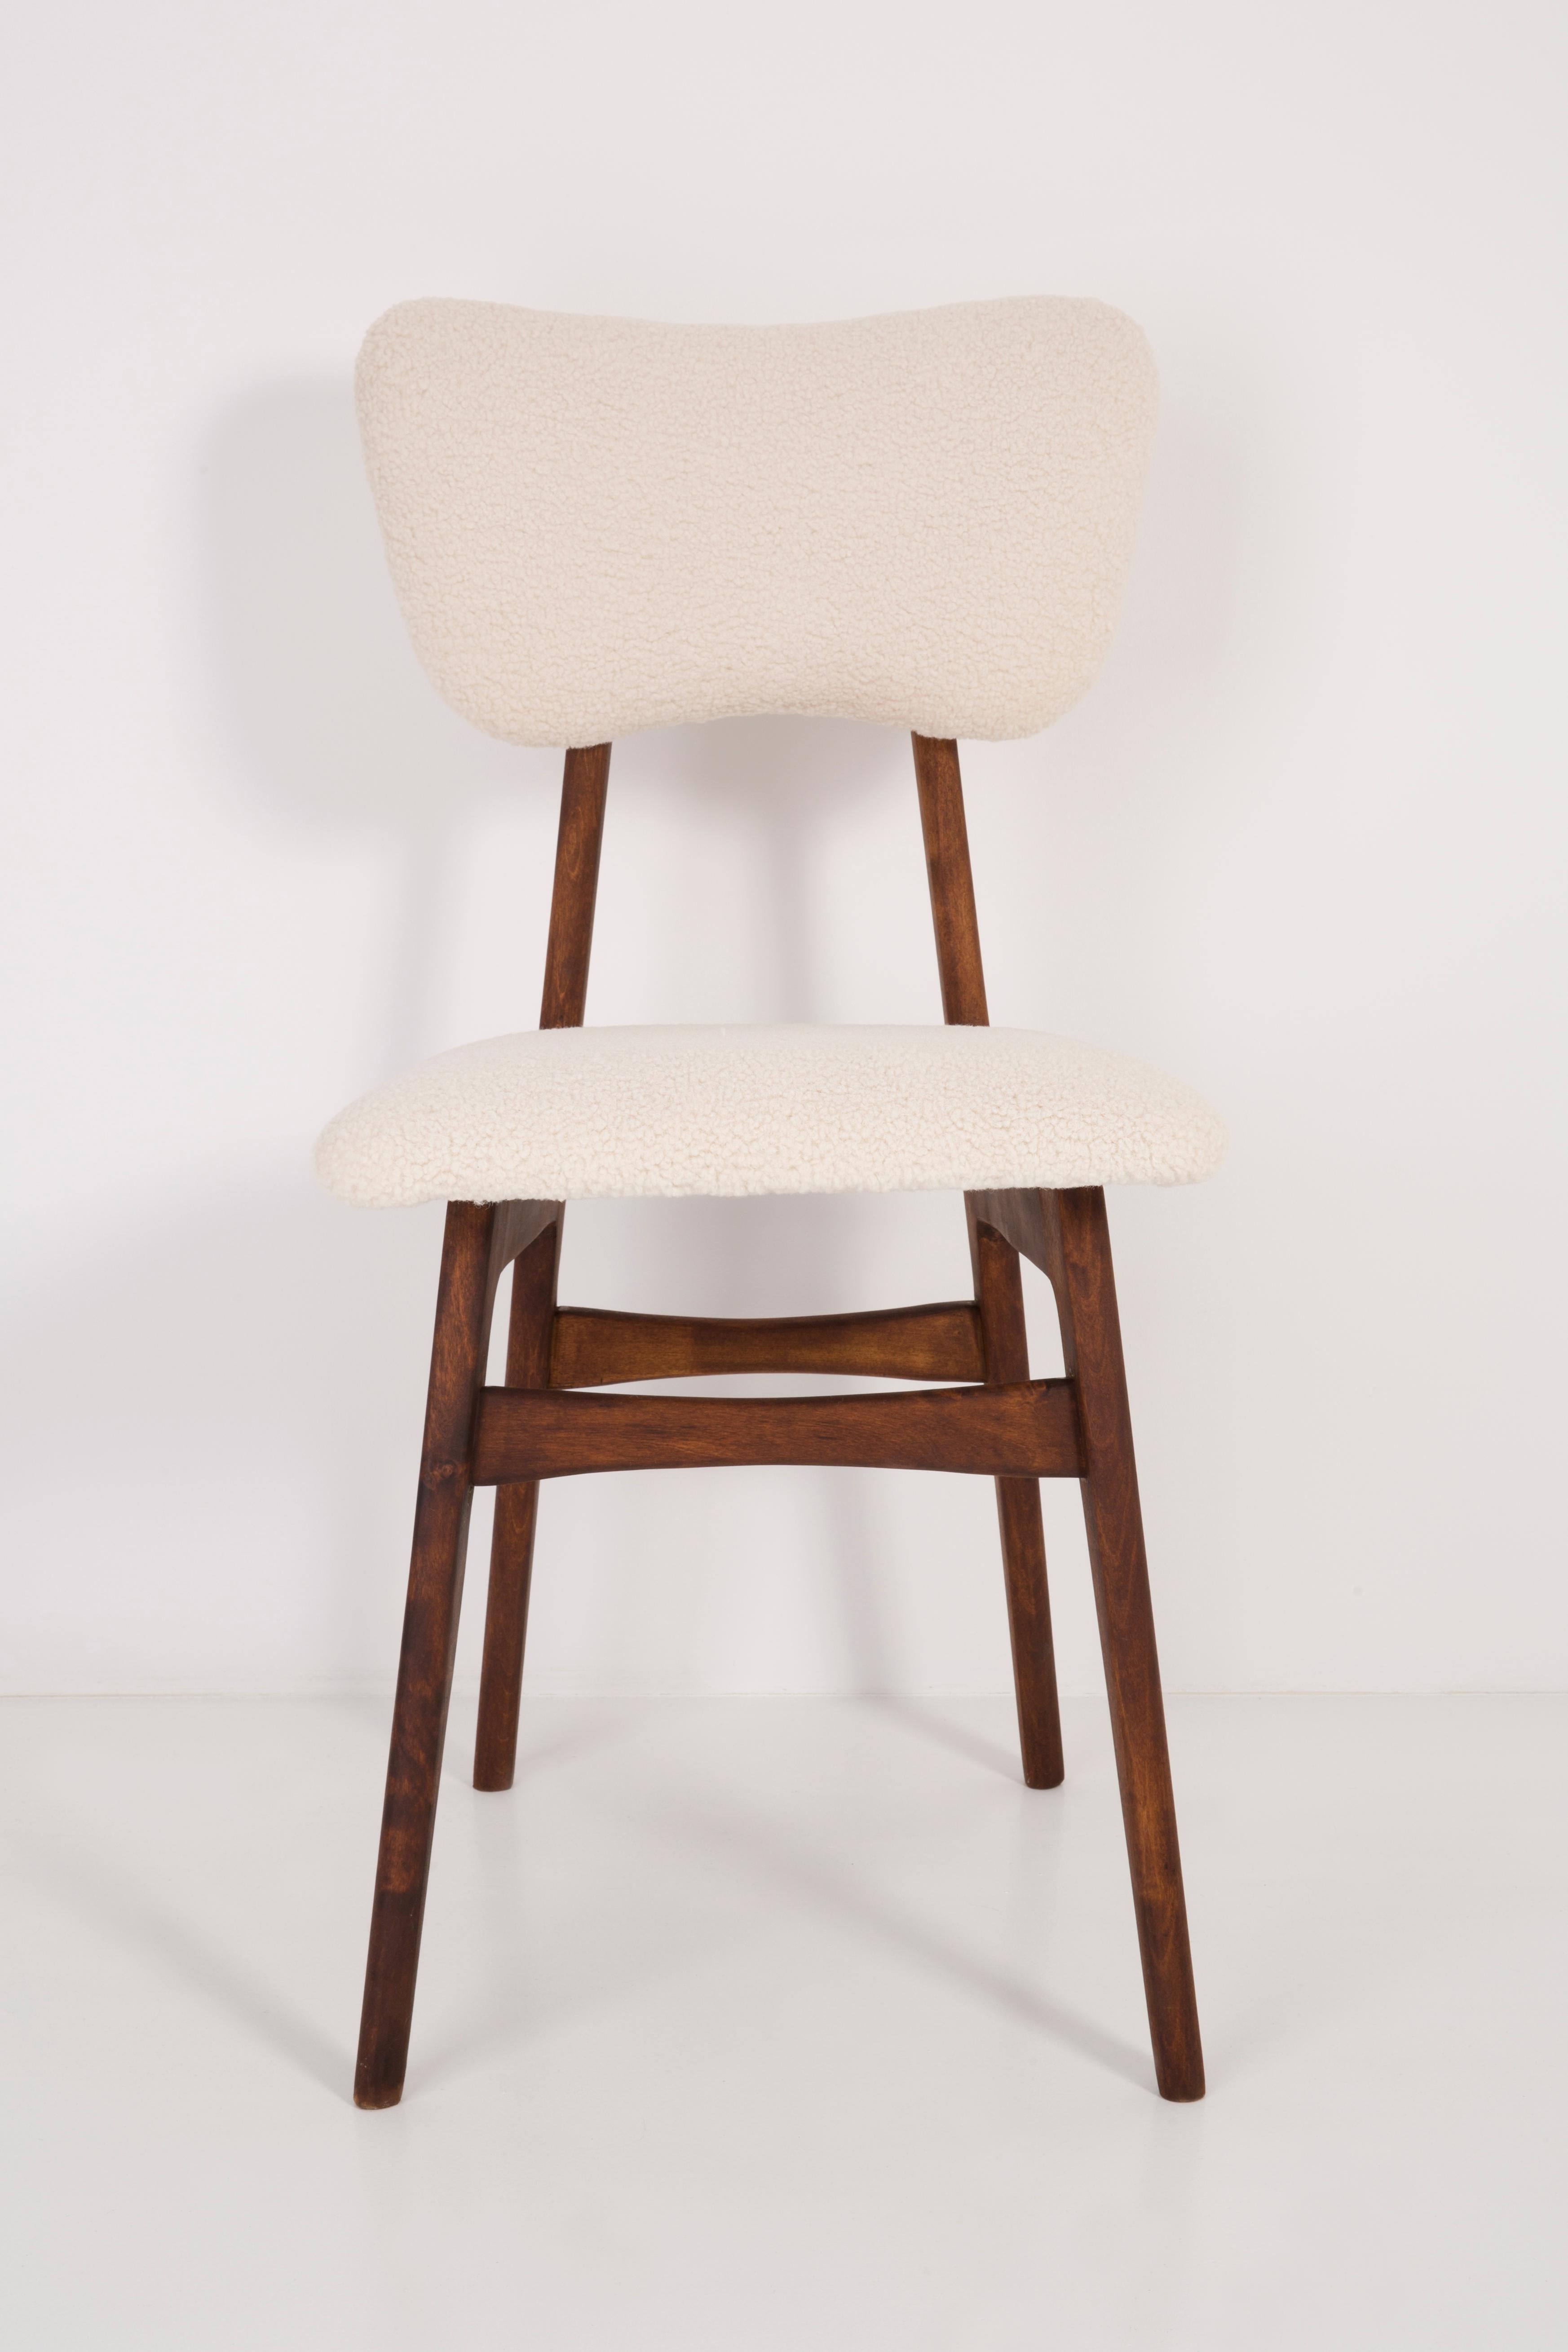 Set of Ten 20th Century Light Crème Boucle Chairs, 1960s For Sale 3